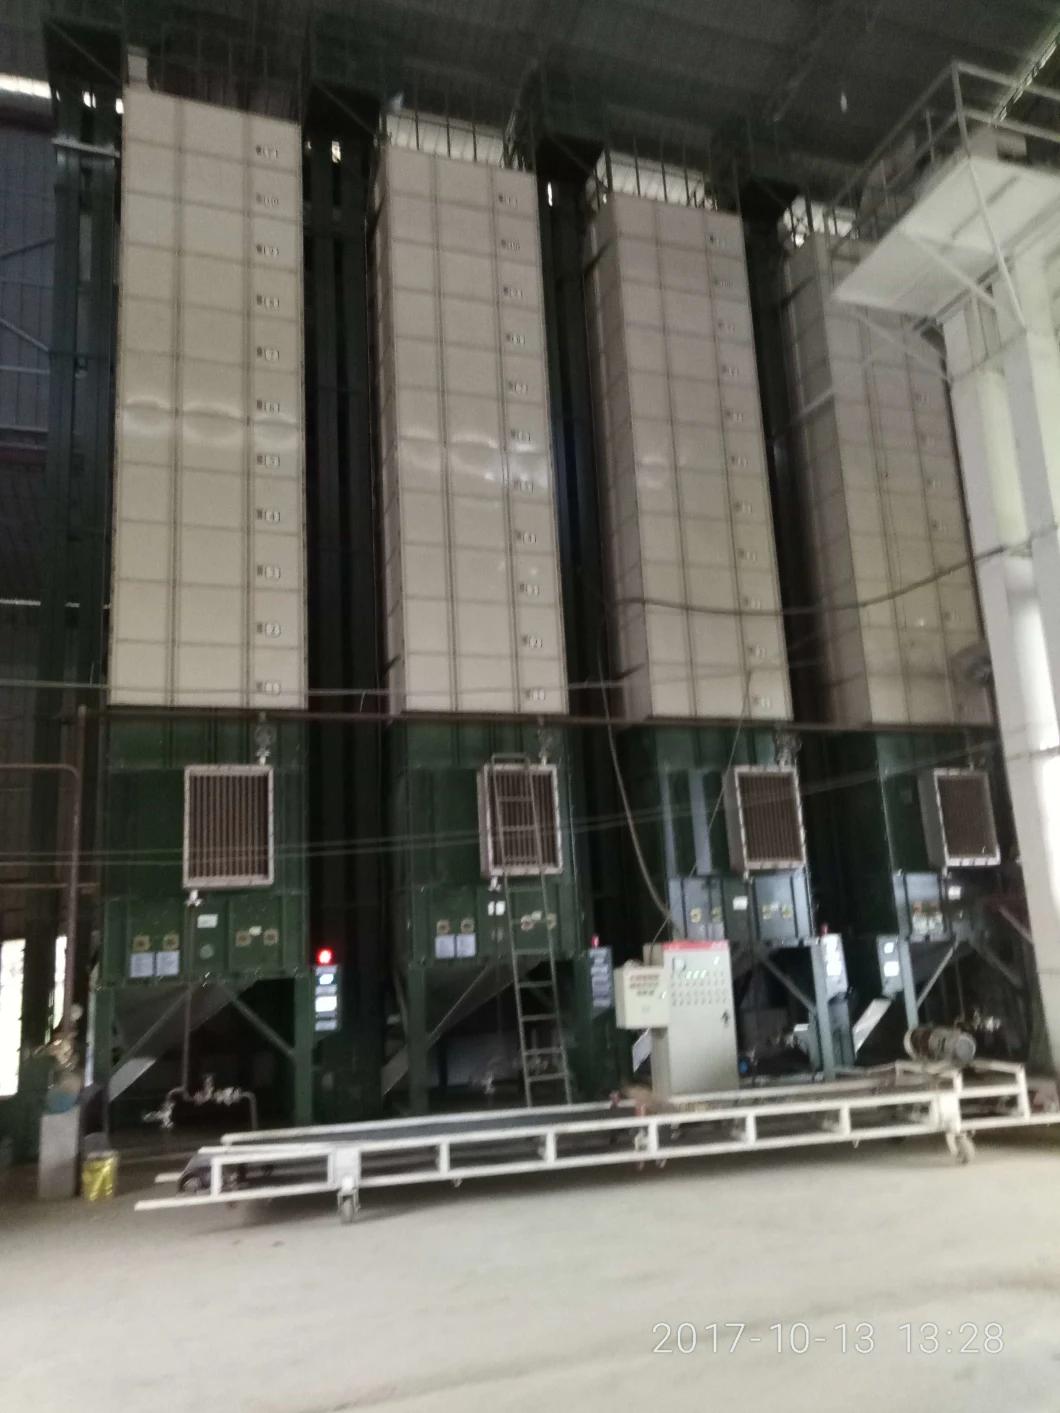 High Quality Efficient Rice Paddy Grain Maize Corn Drying Machine Industrial Dryer Rice Plant Machine